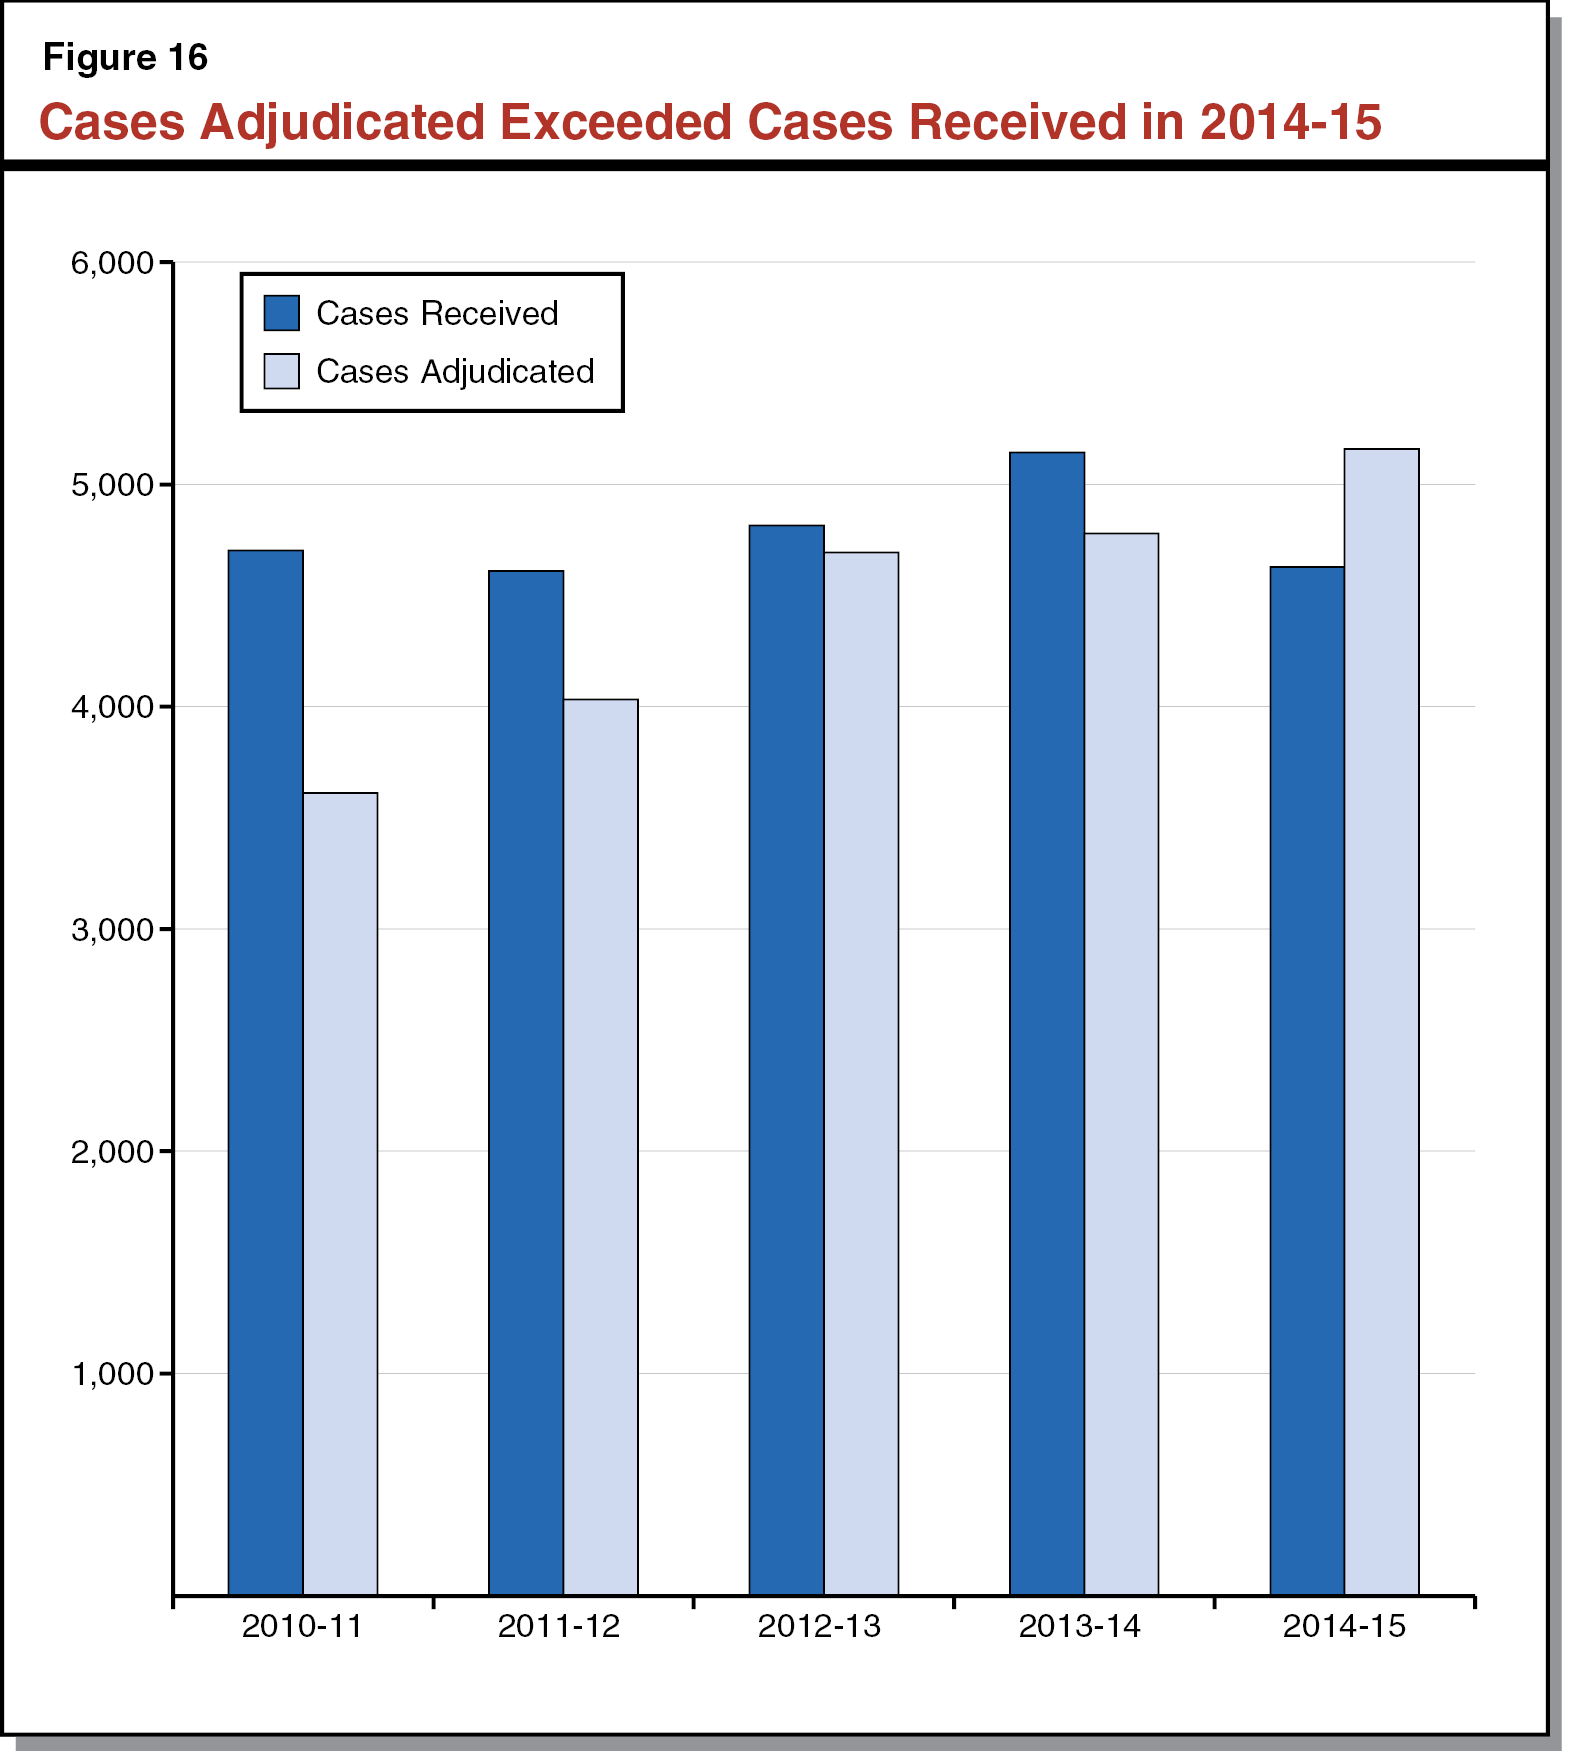 Figure 16 - Cases Adjudicated Exceeded Cases Received in 2014-15